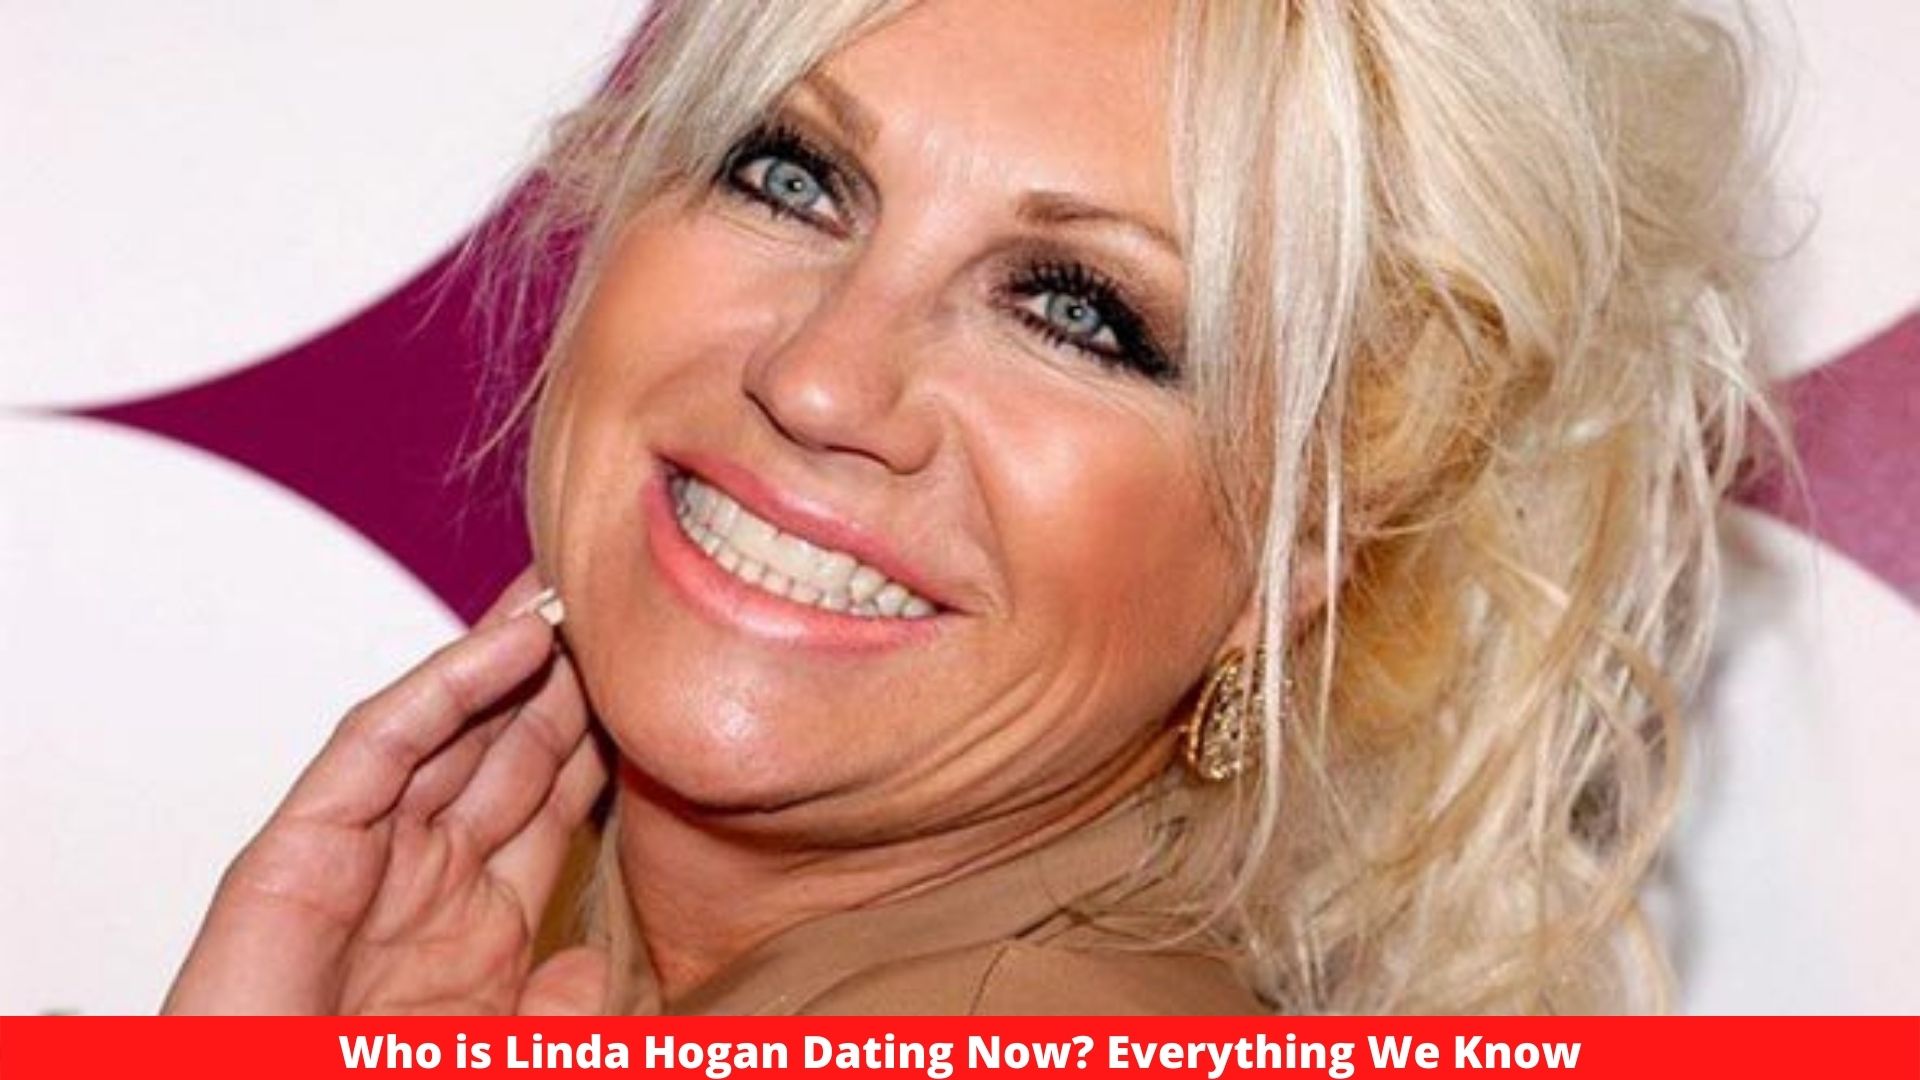 Who is Linda Hogan Dating Now? Everything We Know